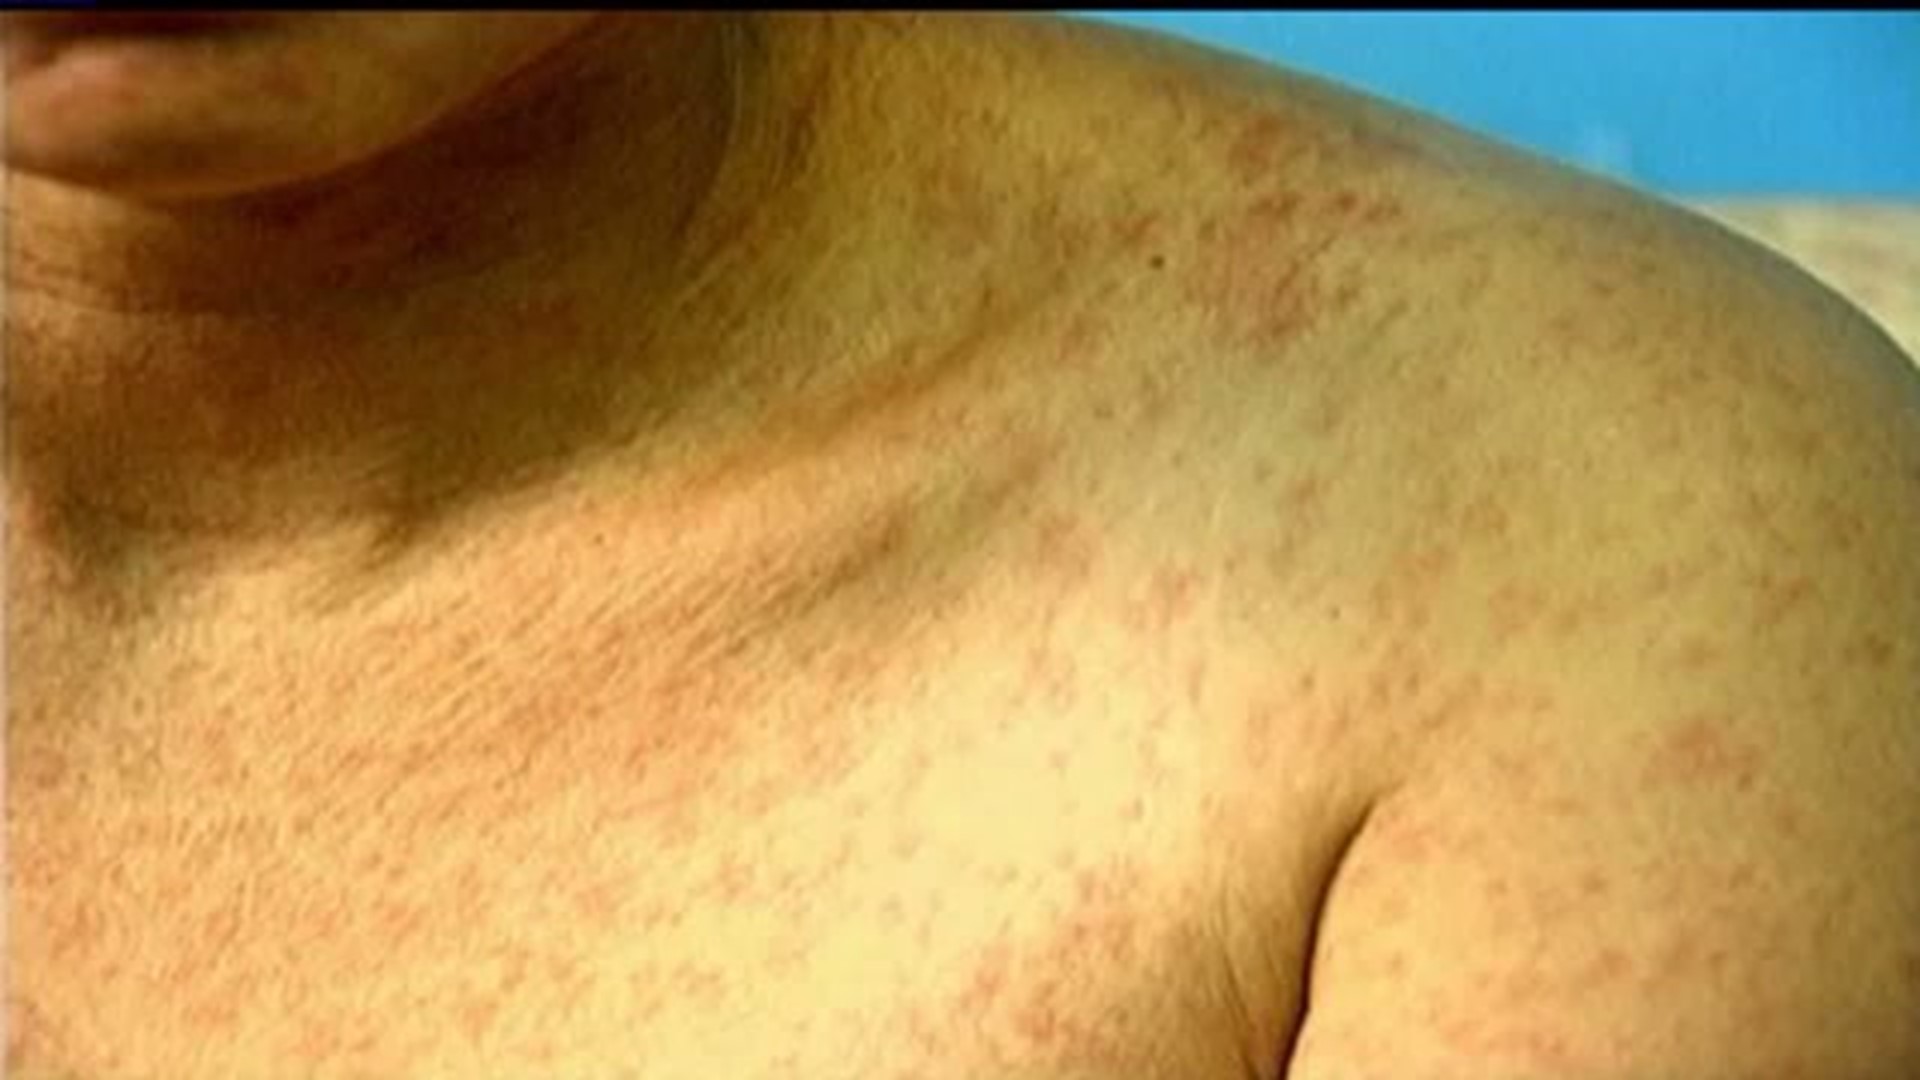 Possible measles exposure in Cumberland and Franklin counties